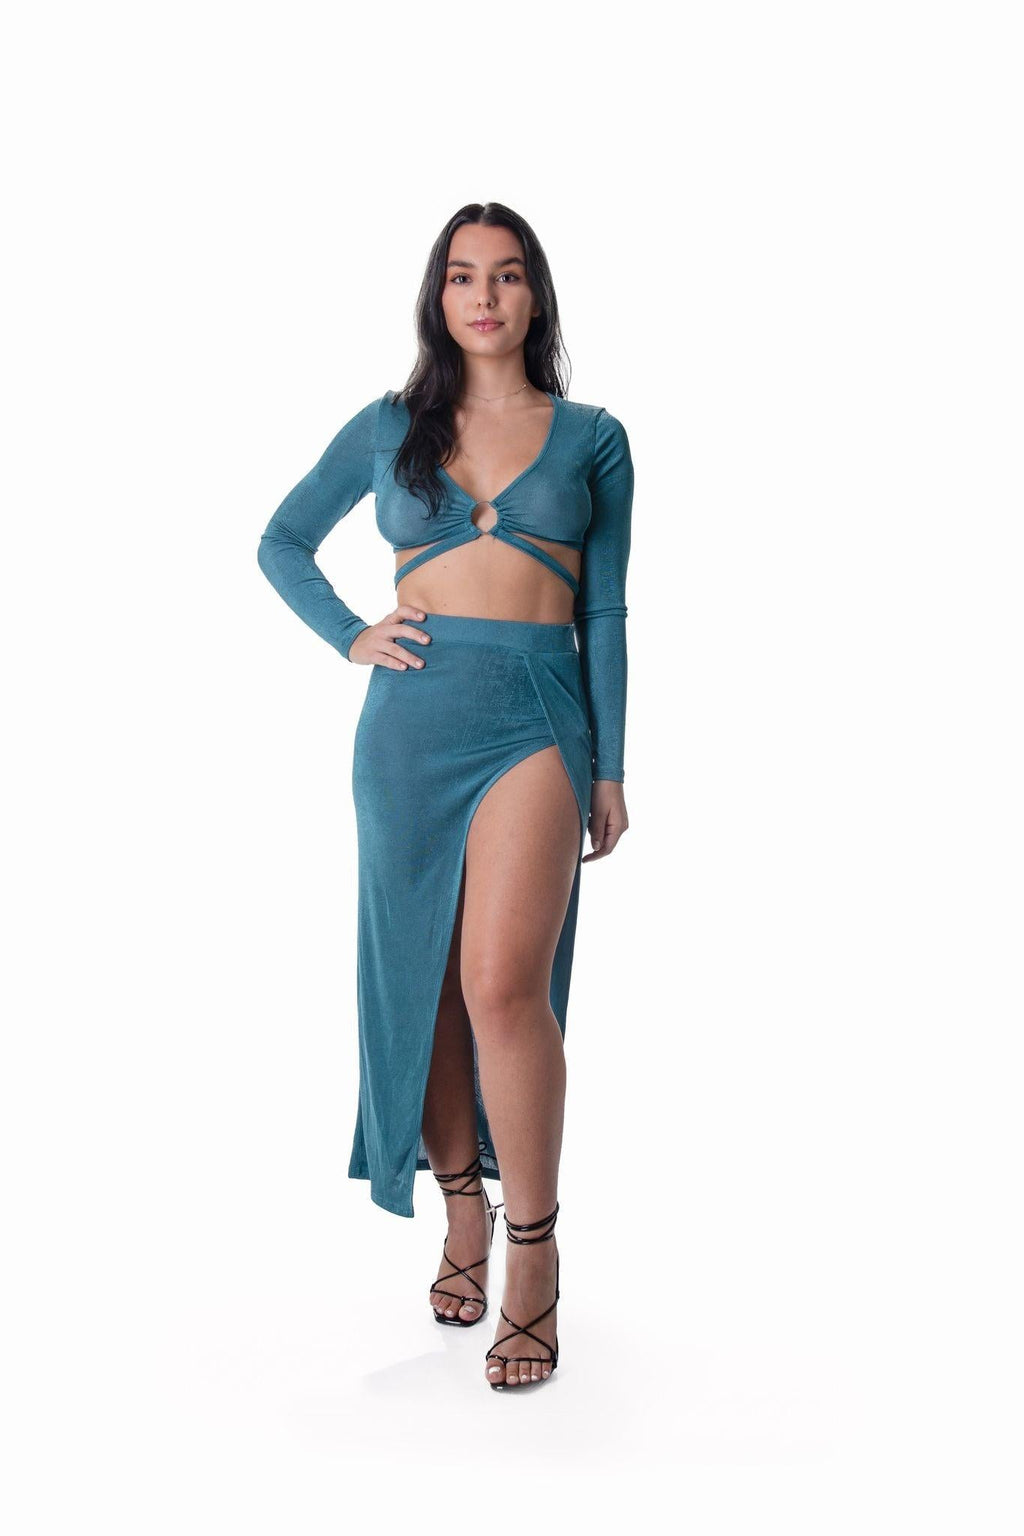 Thigh Split Skirt in Turquoise - watts that trend